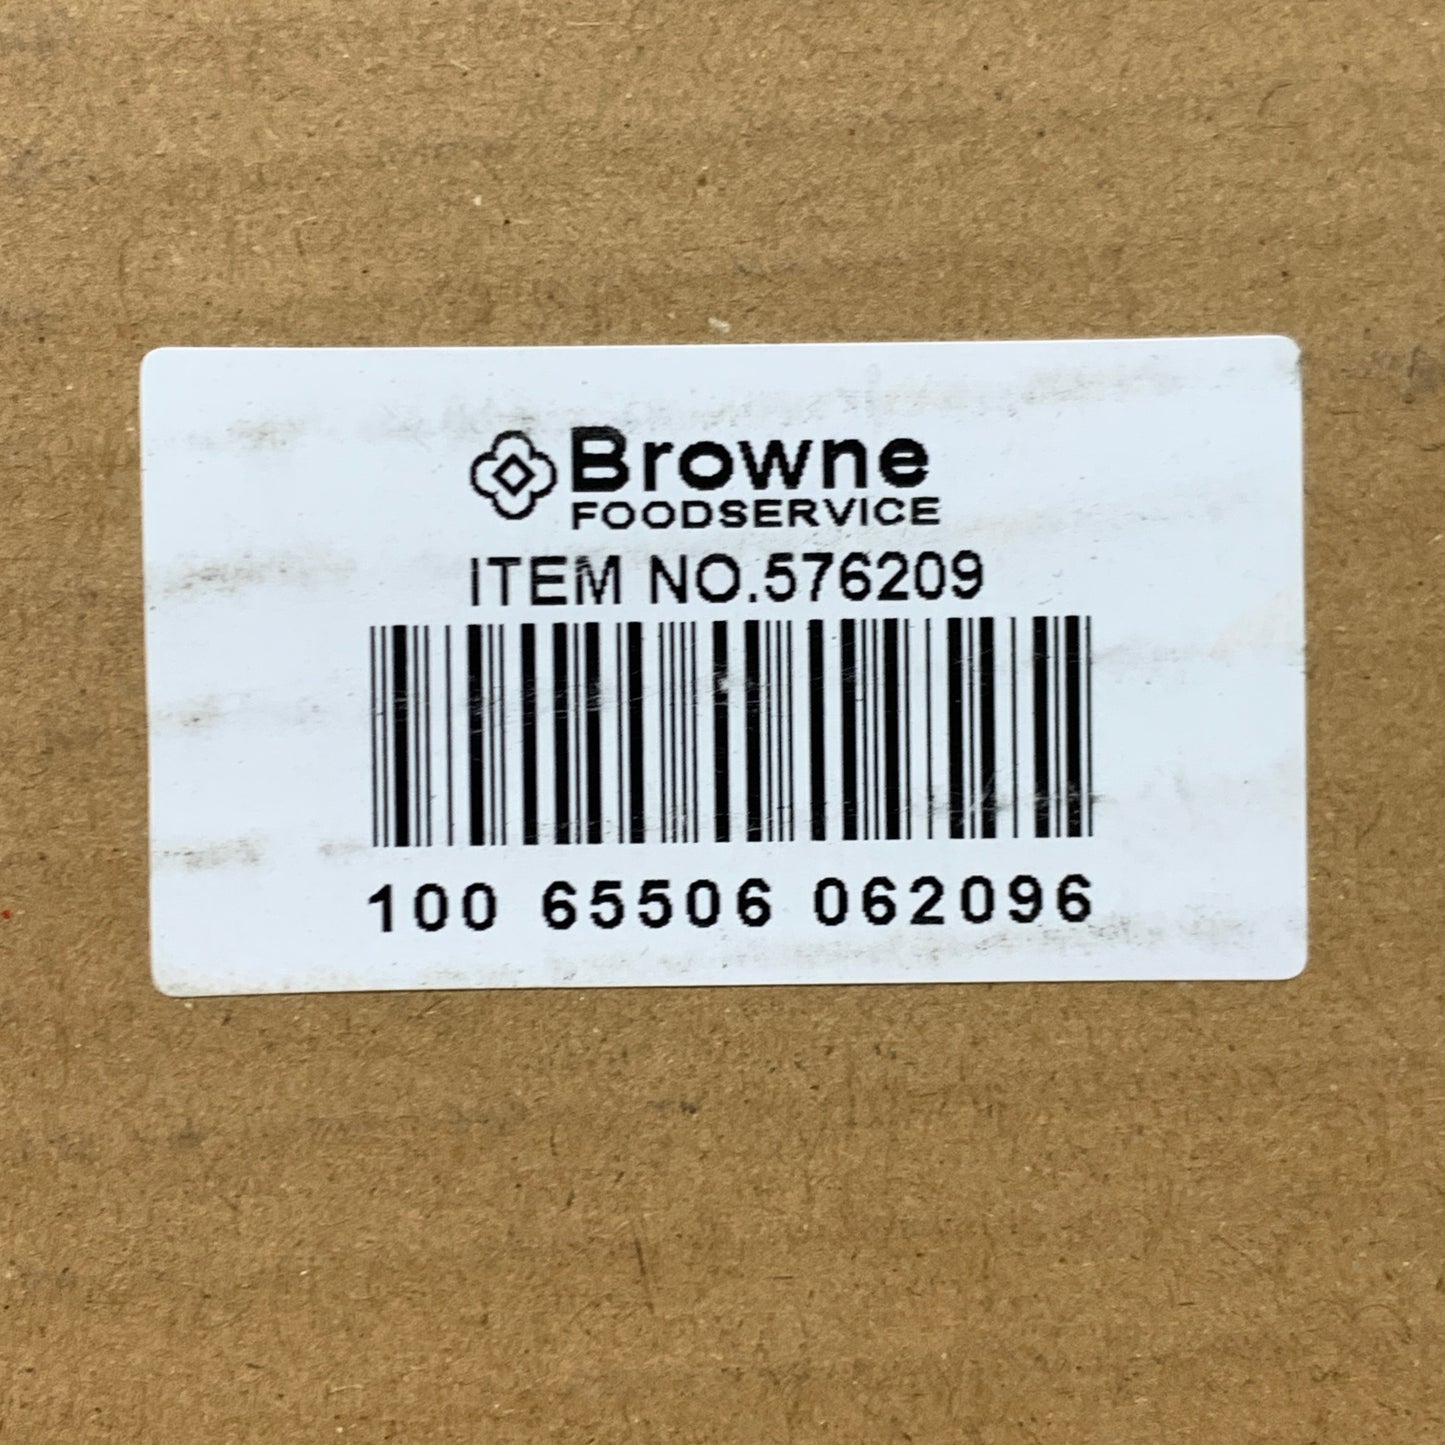 BROWNE 3-PACK! Foodservice Thermalloy Combi Pan 8 21.5L"x13W"x1H" 576209 (New)